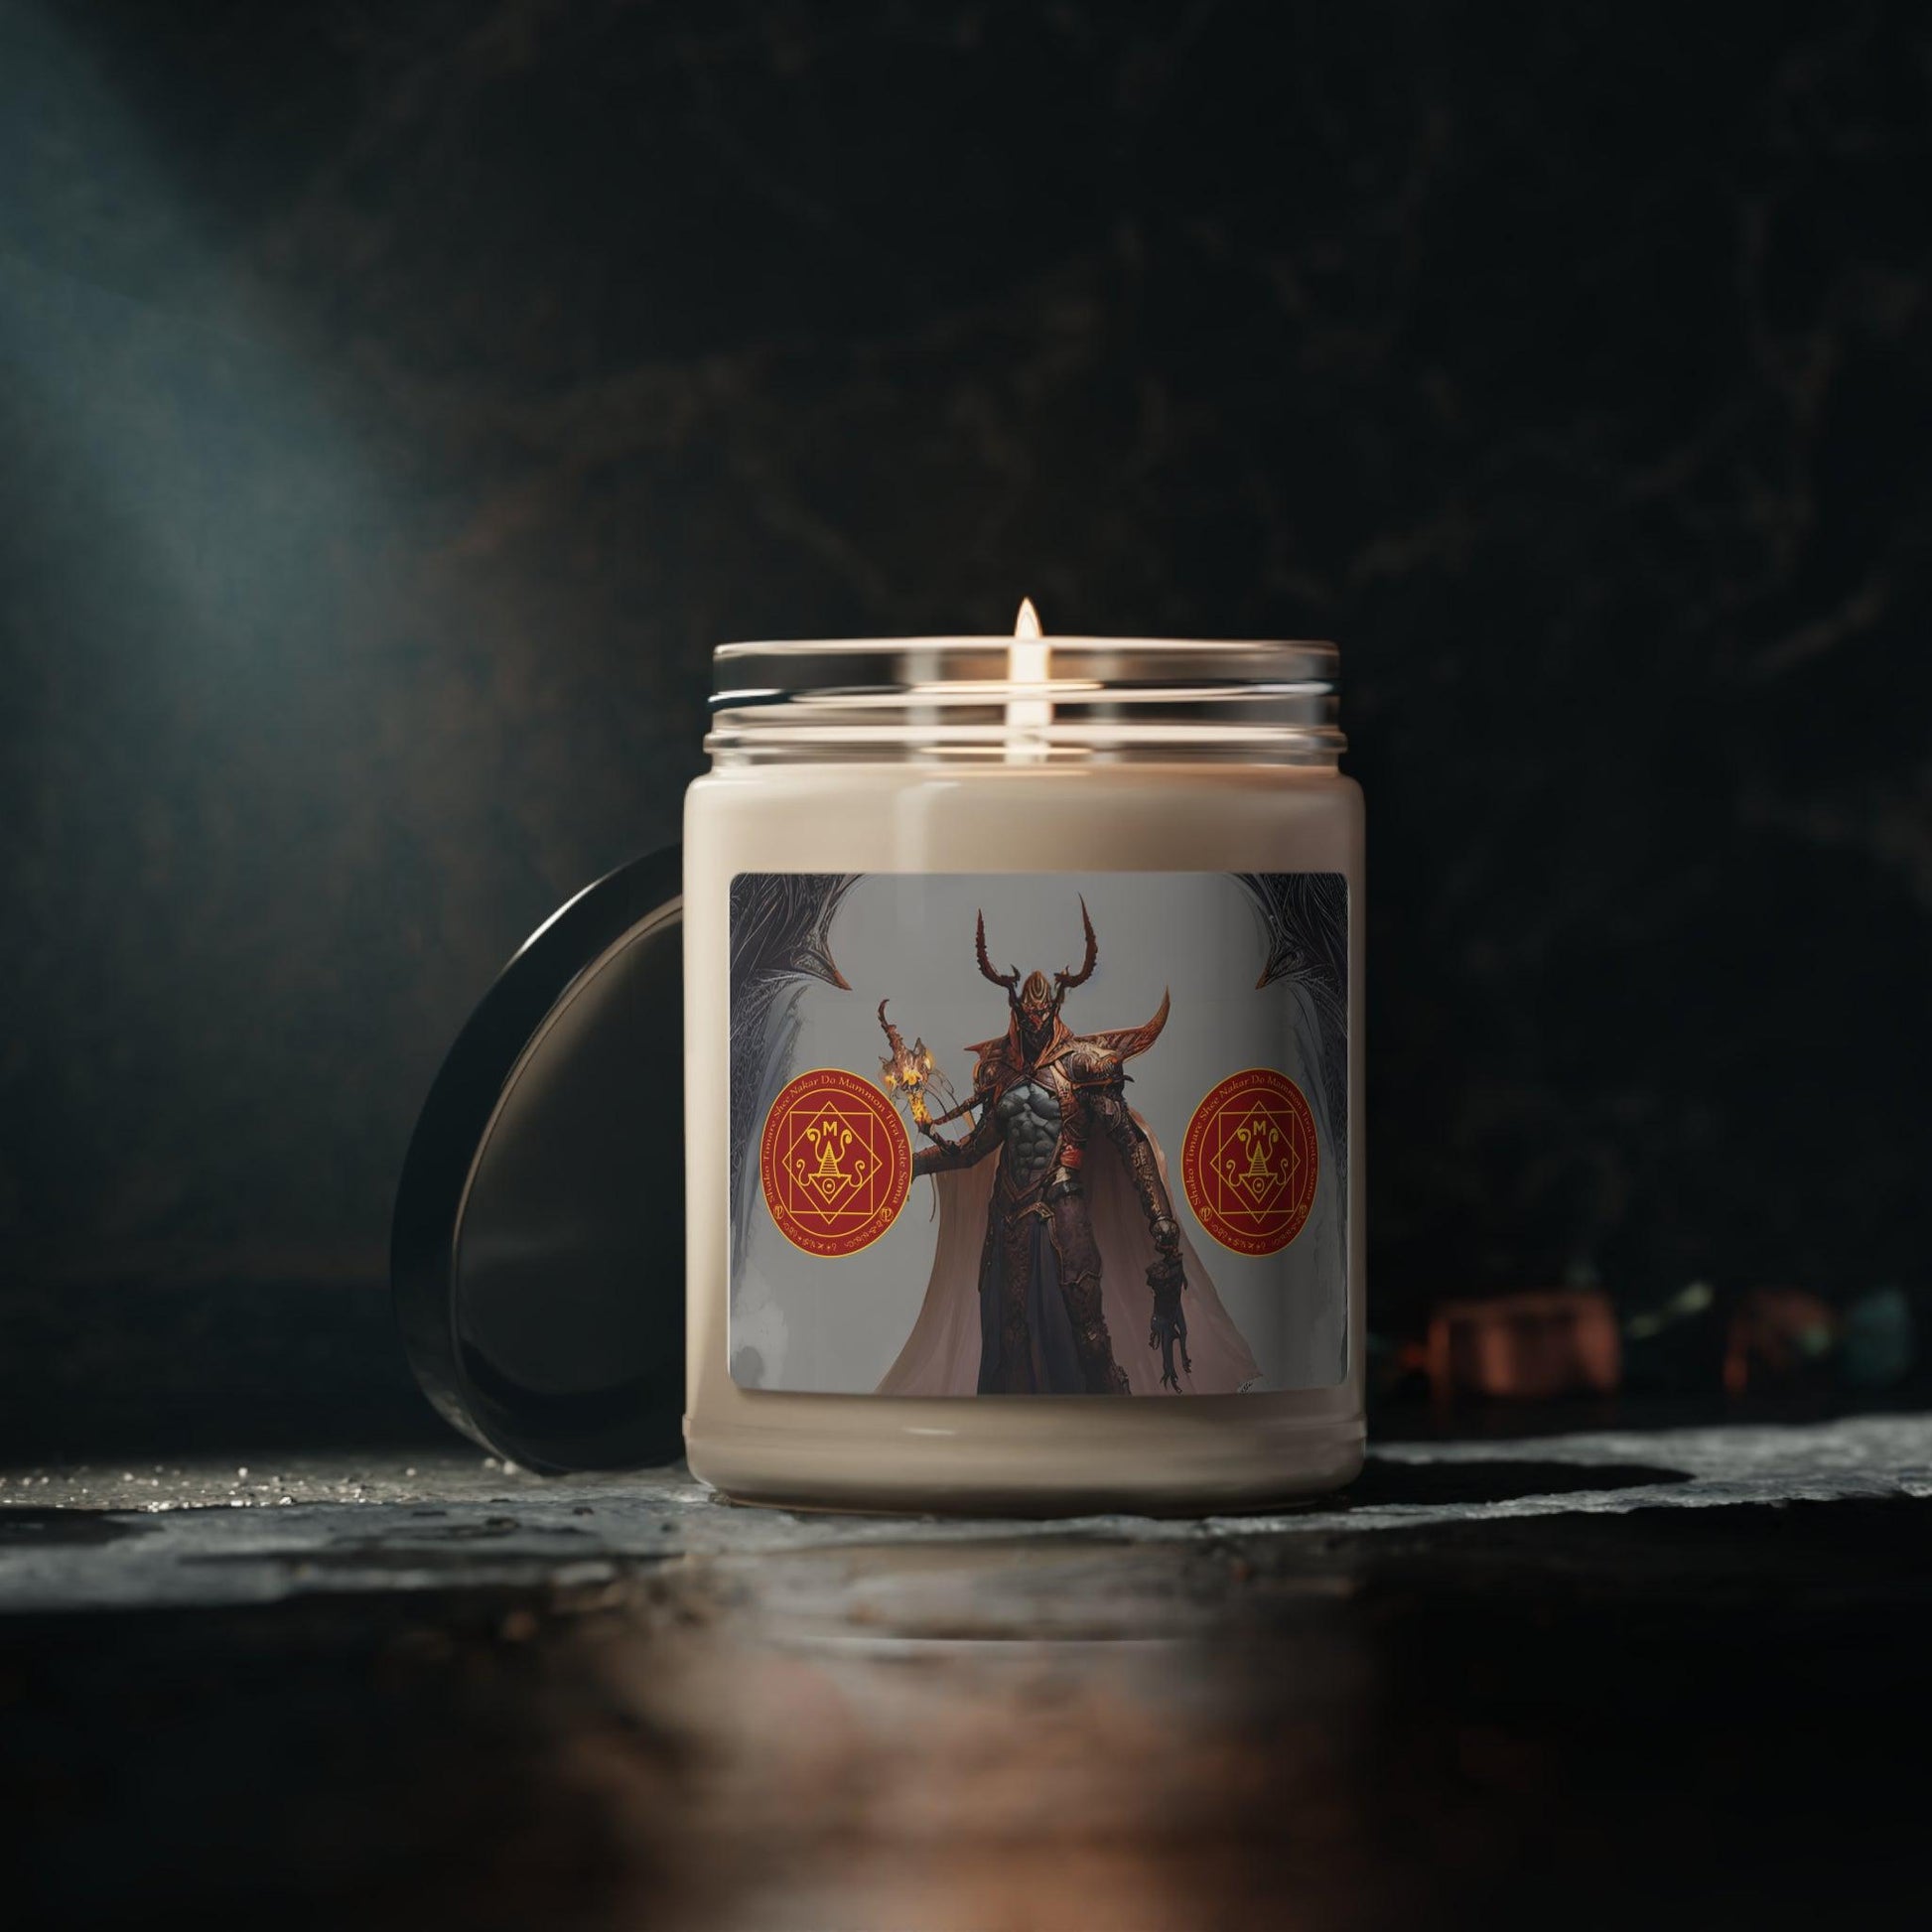 Demon-Mammon-Altar-Scented-Soy-Candle-for-Money-related-offerings-rituals-initiations-or-praying-and-meditation-10